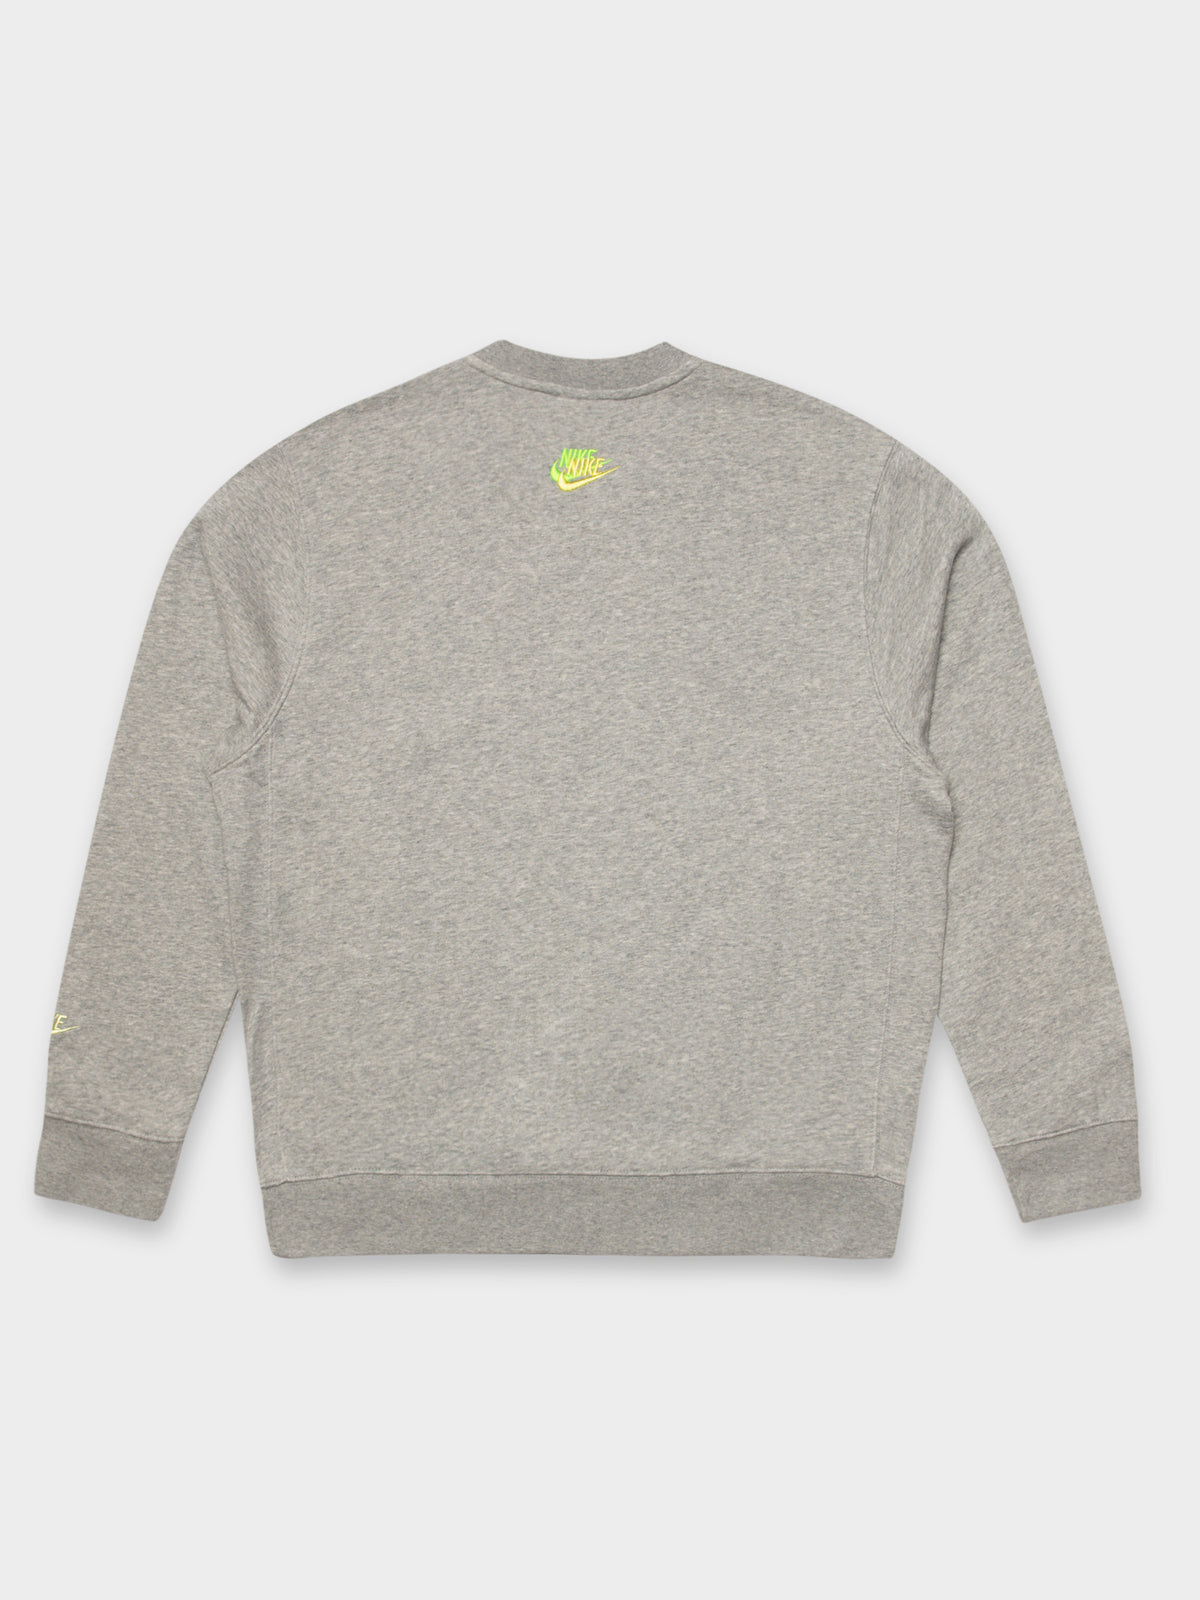 NSW Essentials French Terry Crew in Grey Heather